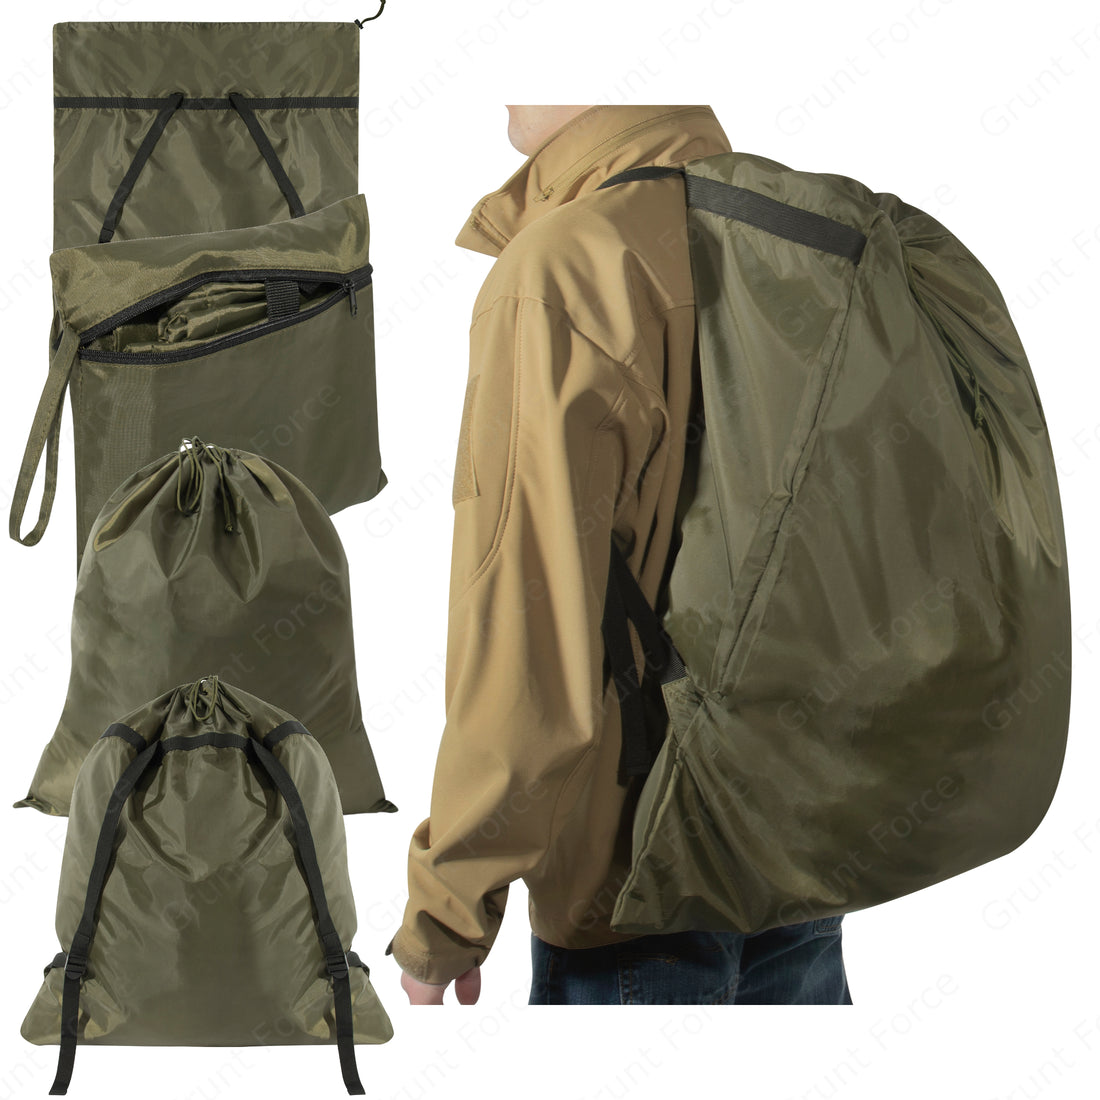 Rothco's Packable Laundry Bag Backpack- Olive Drab